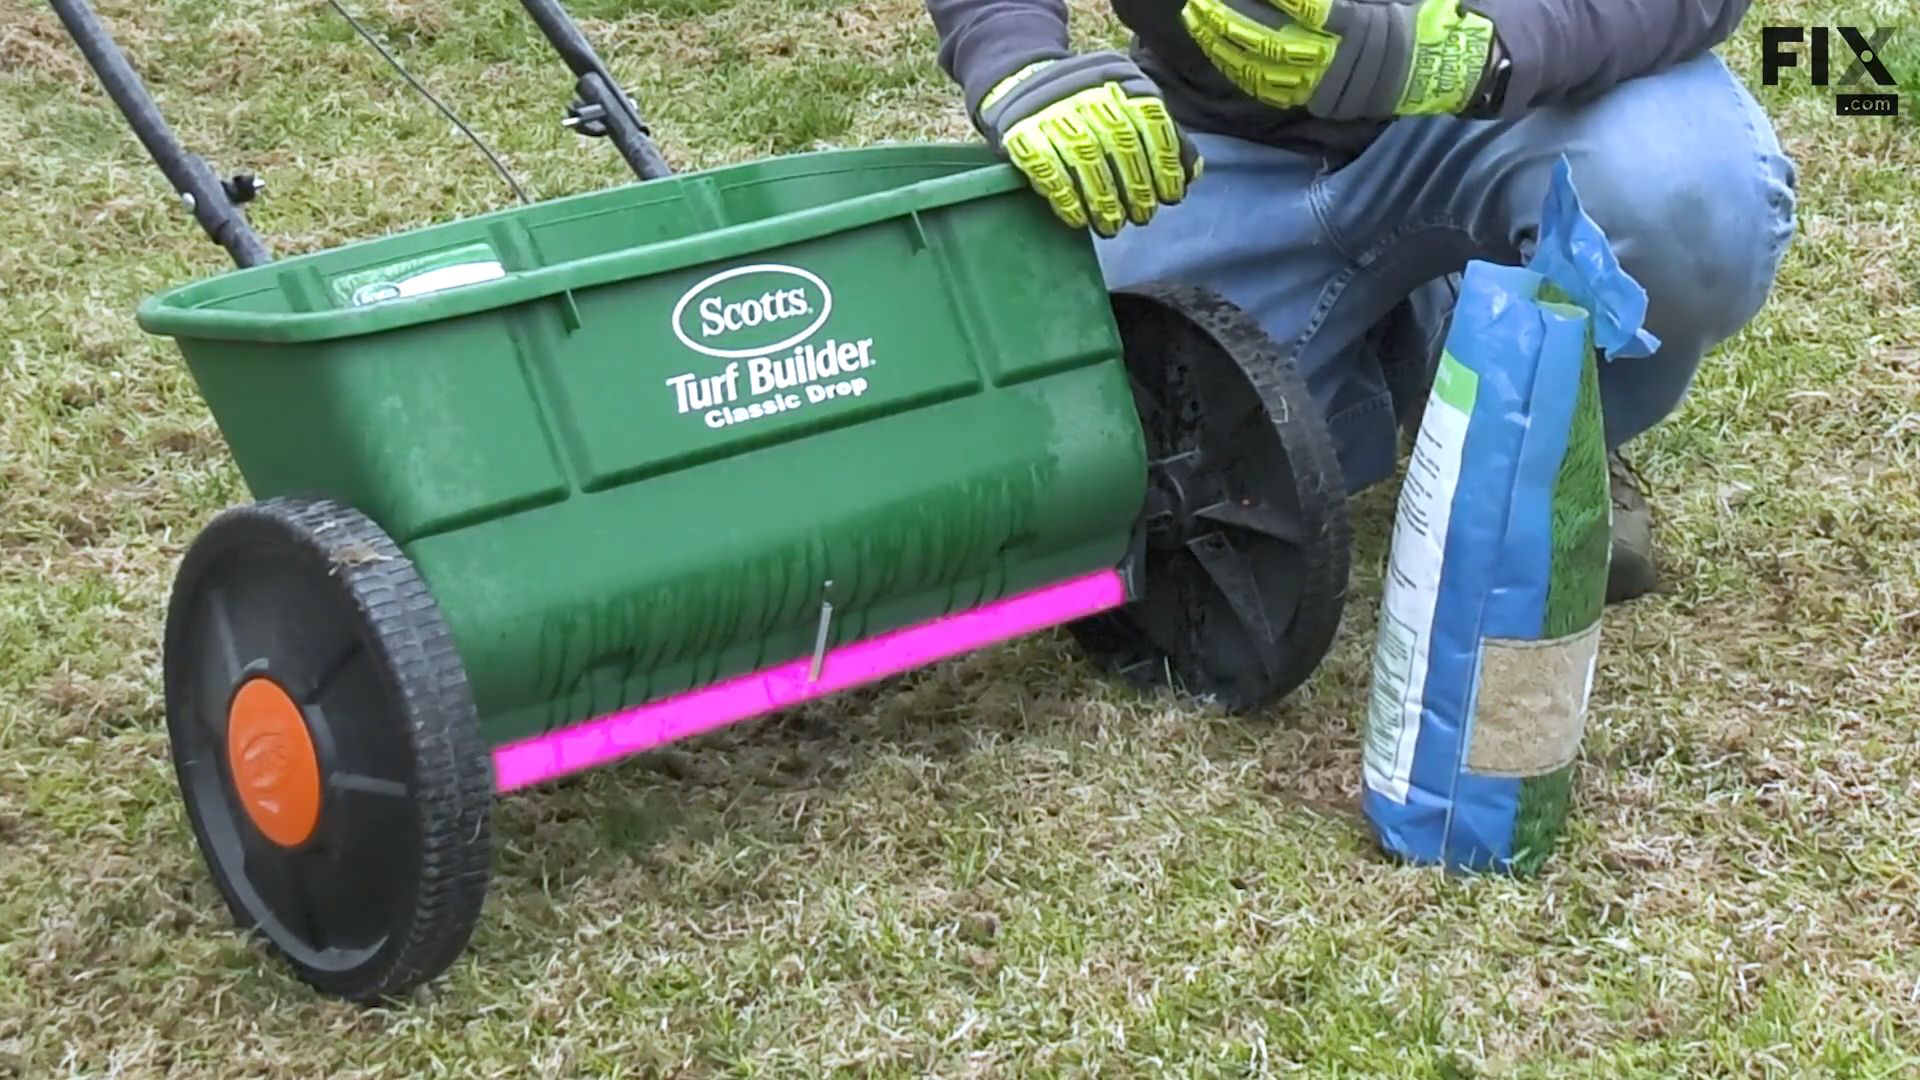 Man wearing protective gloves crouching between a bag of fertilizer and a drop fertilizer spreader with its bottom door highlighted in pink